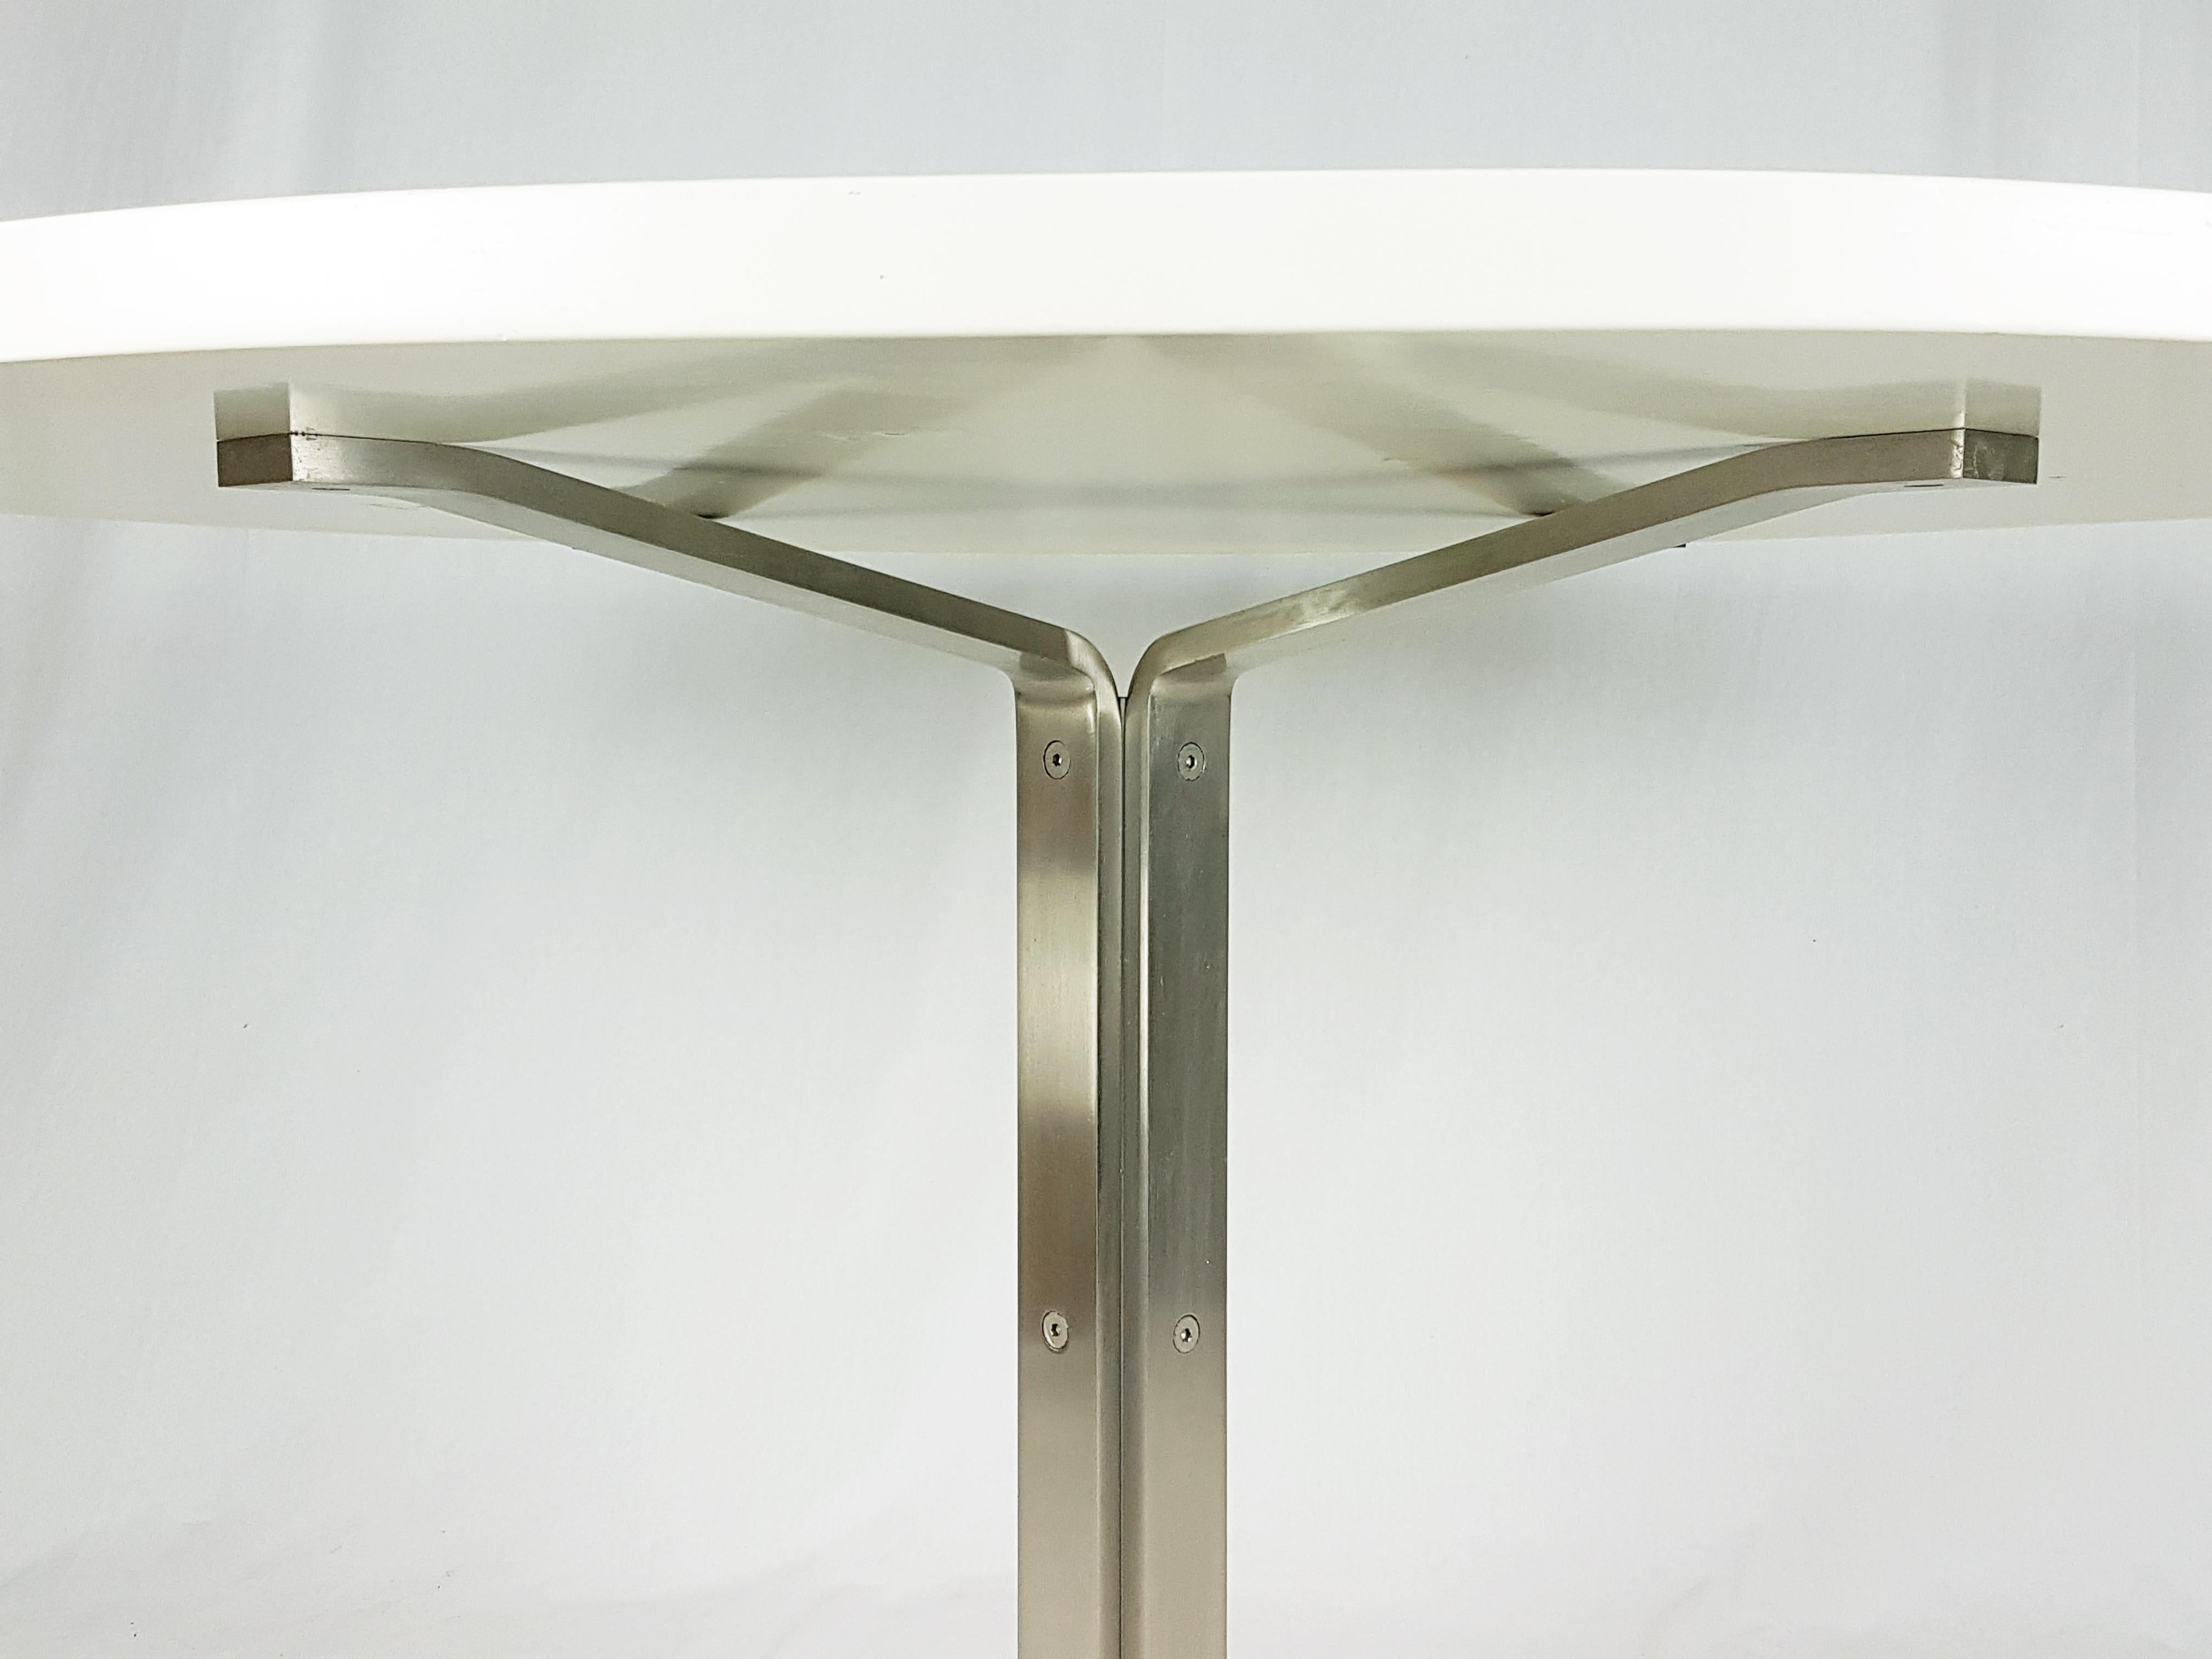 Space Age Italian Steel and White Wooden 1970s Round Table by G. Moscatelli for Formanova